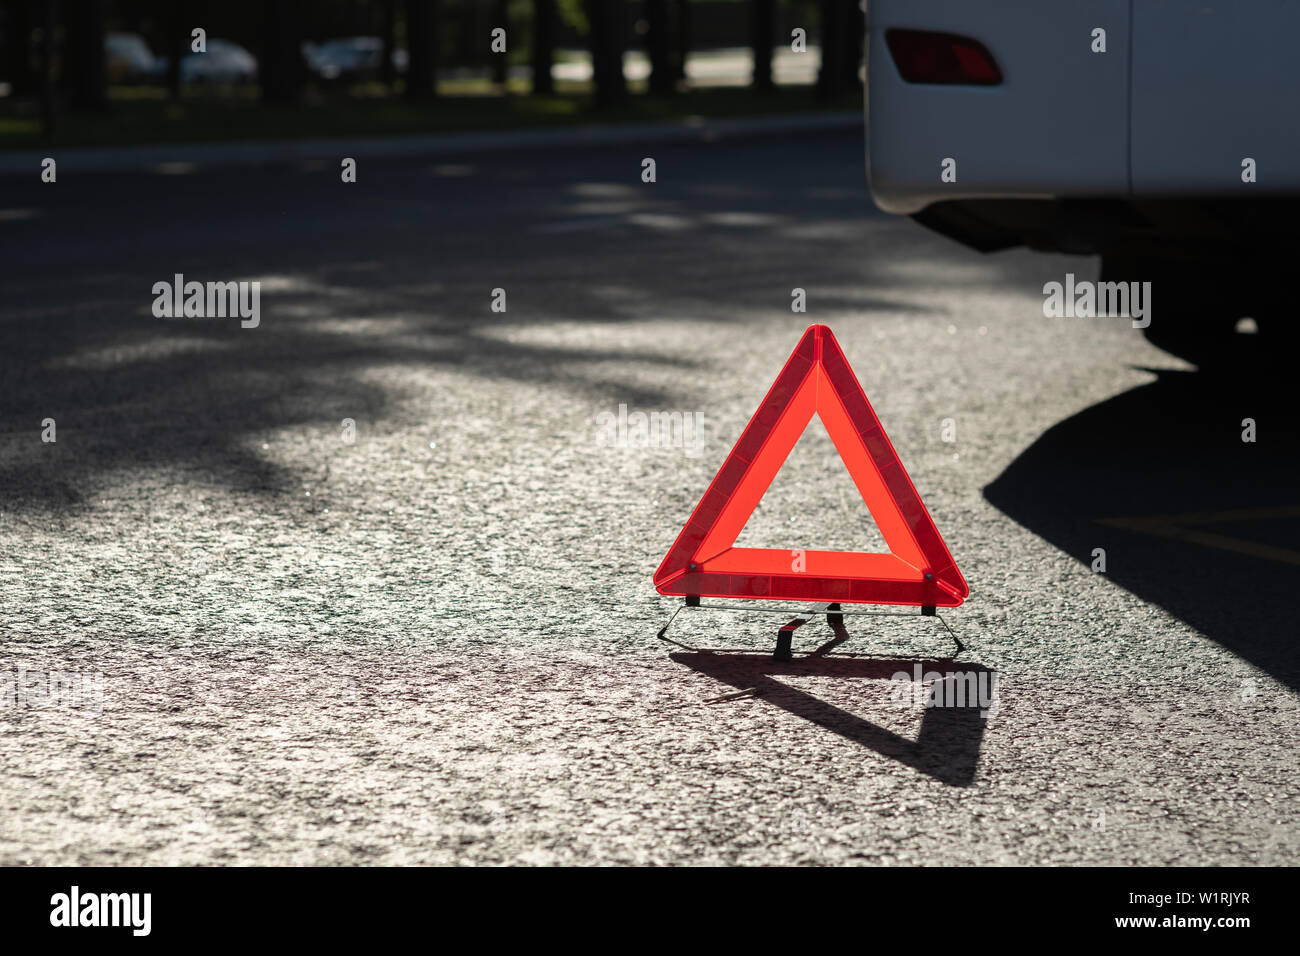 description: Red triangle of a car on the road Stock Photo